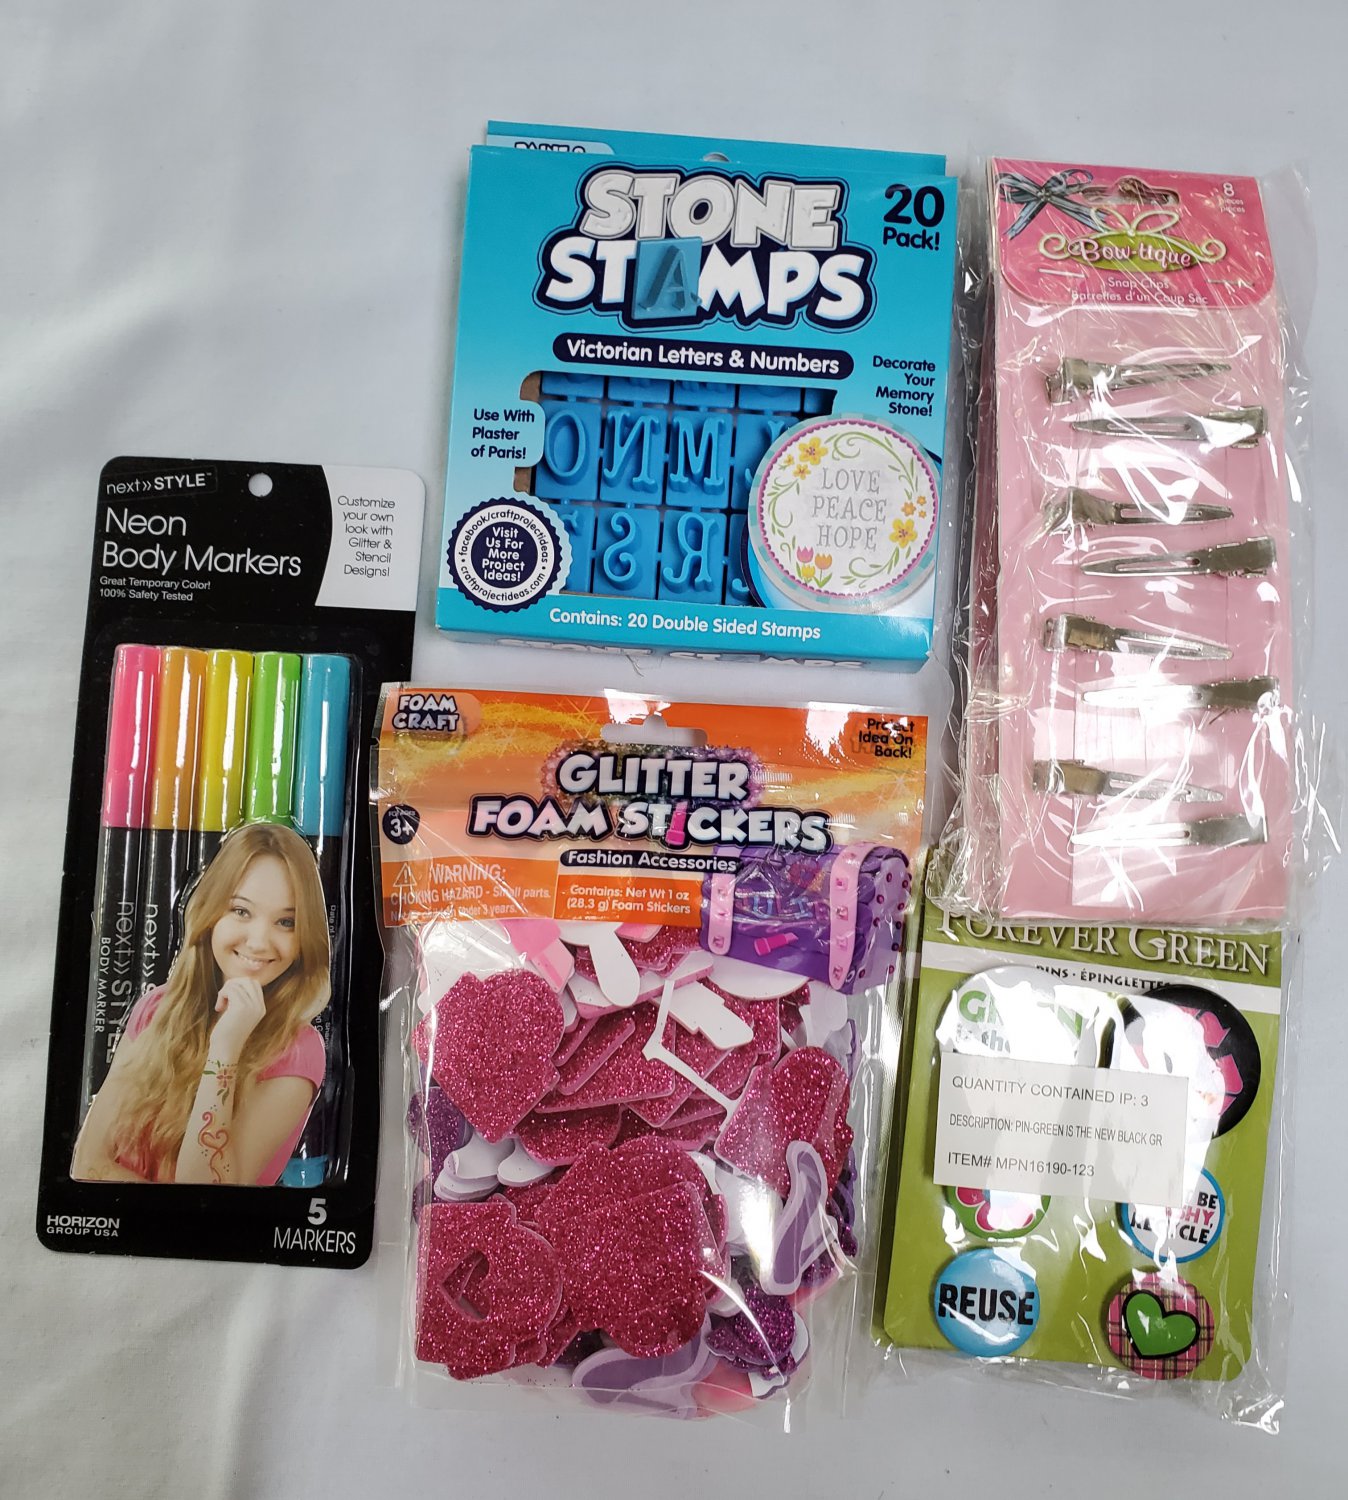 Girls Special Stuff Buy the Lot